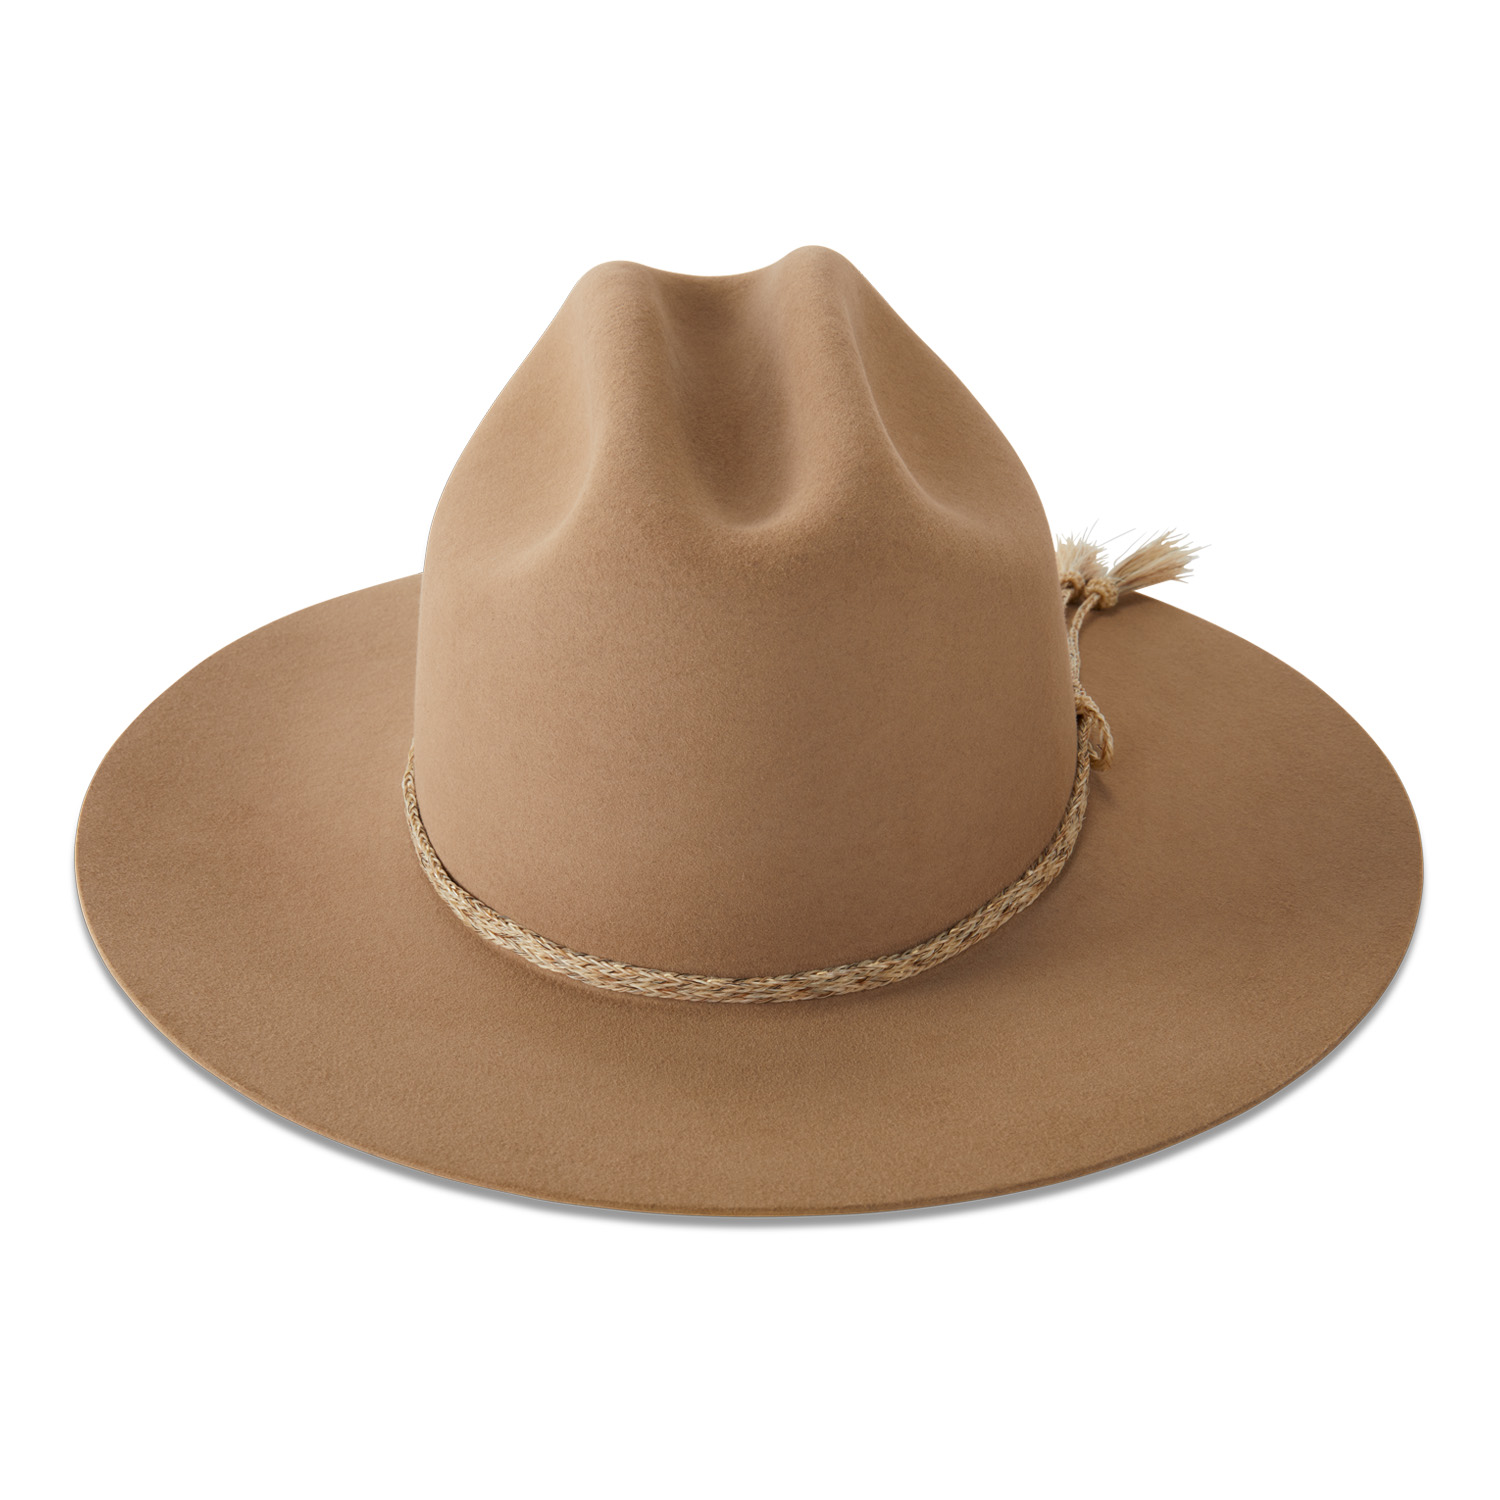 Teardrop Style Western Hat - Stratton Hats - Made in the USA